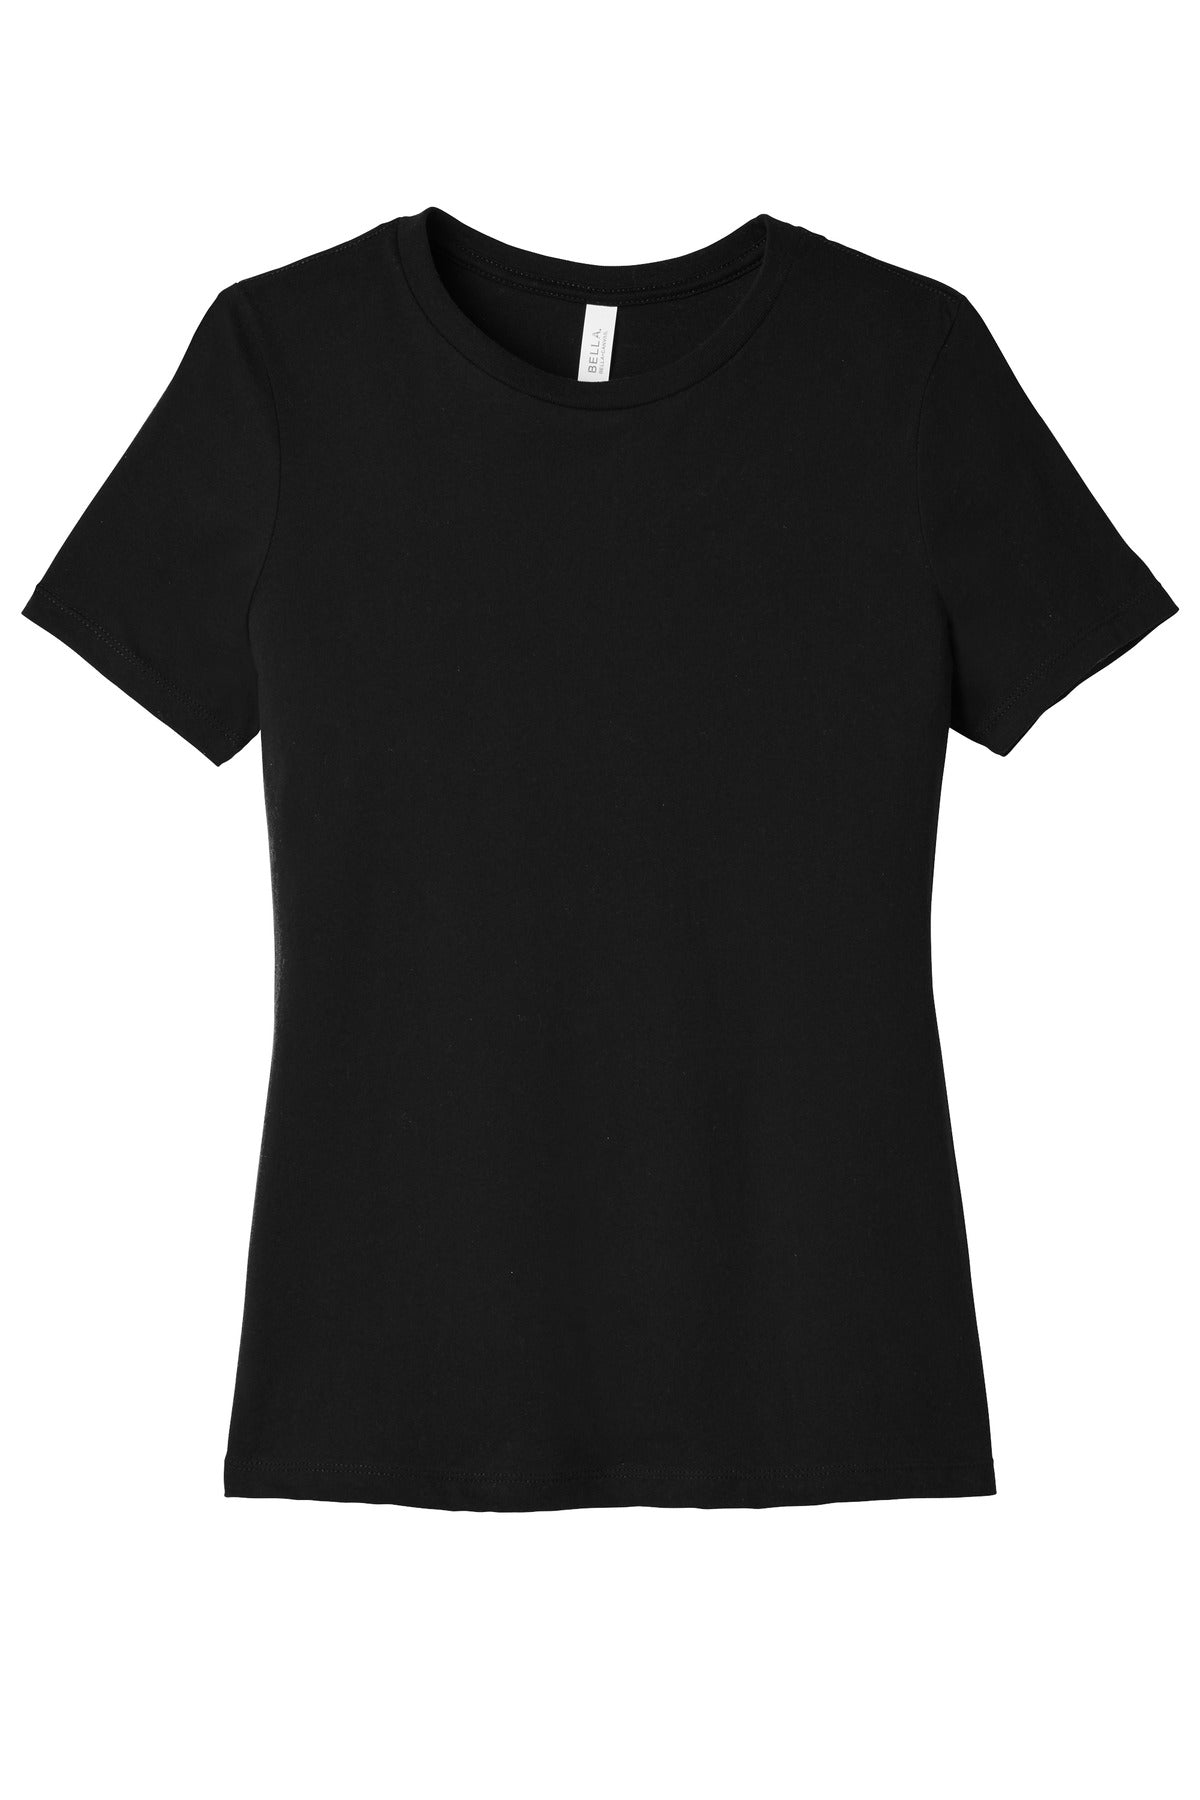 BELLA+CANVAS Women's Relaxed Jersey Short Sleeve Tee. BC6400